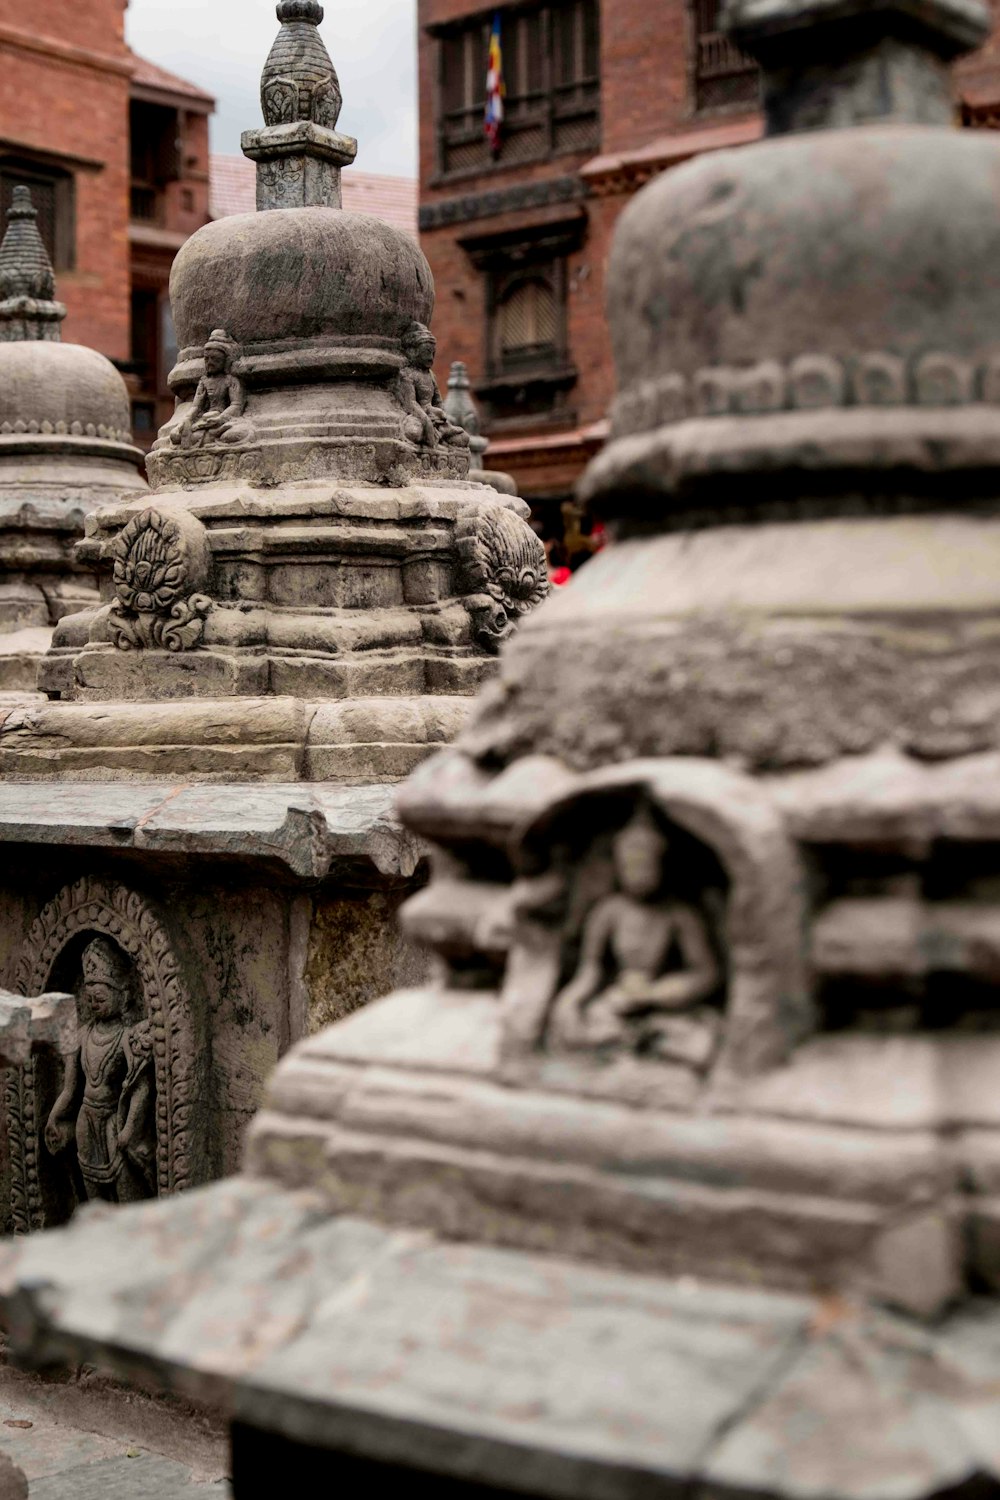 a group of stone statues in front of a building